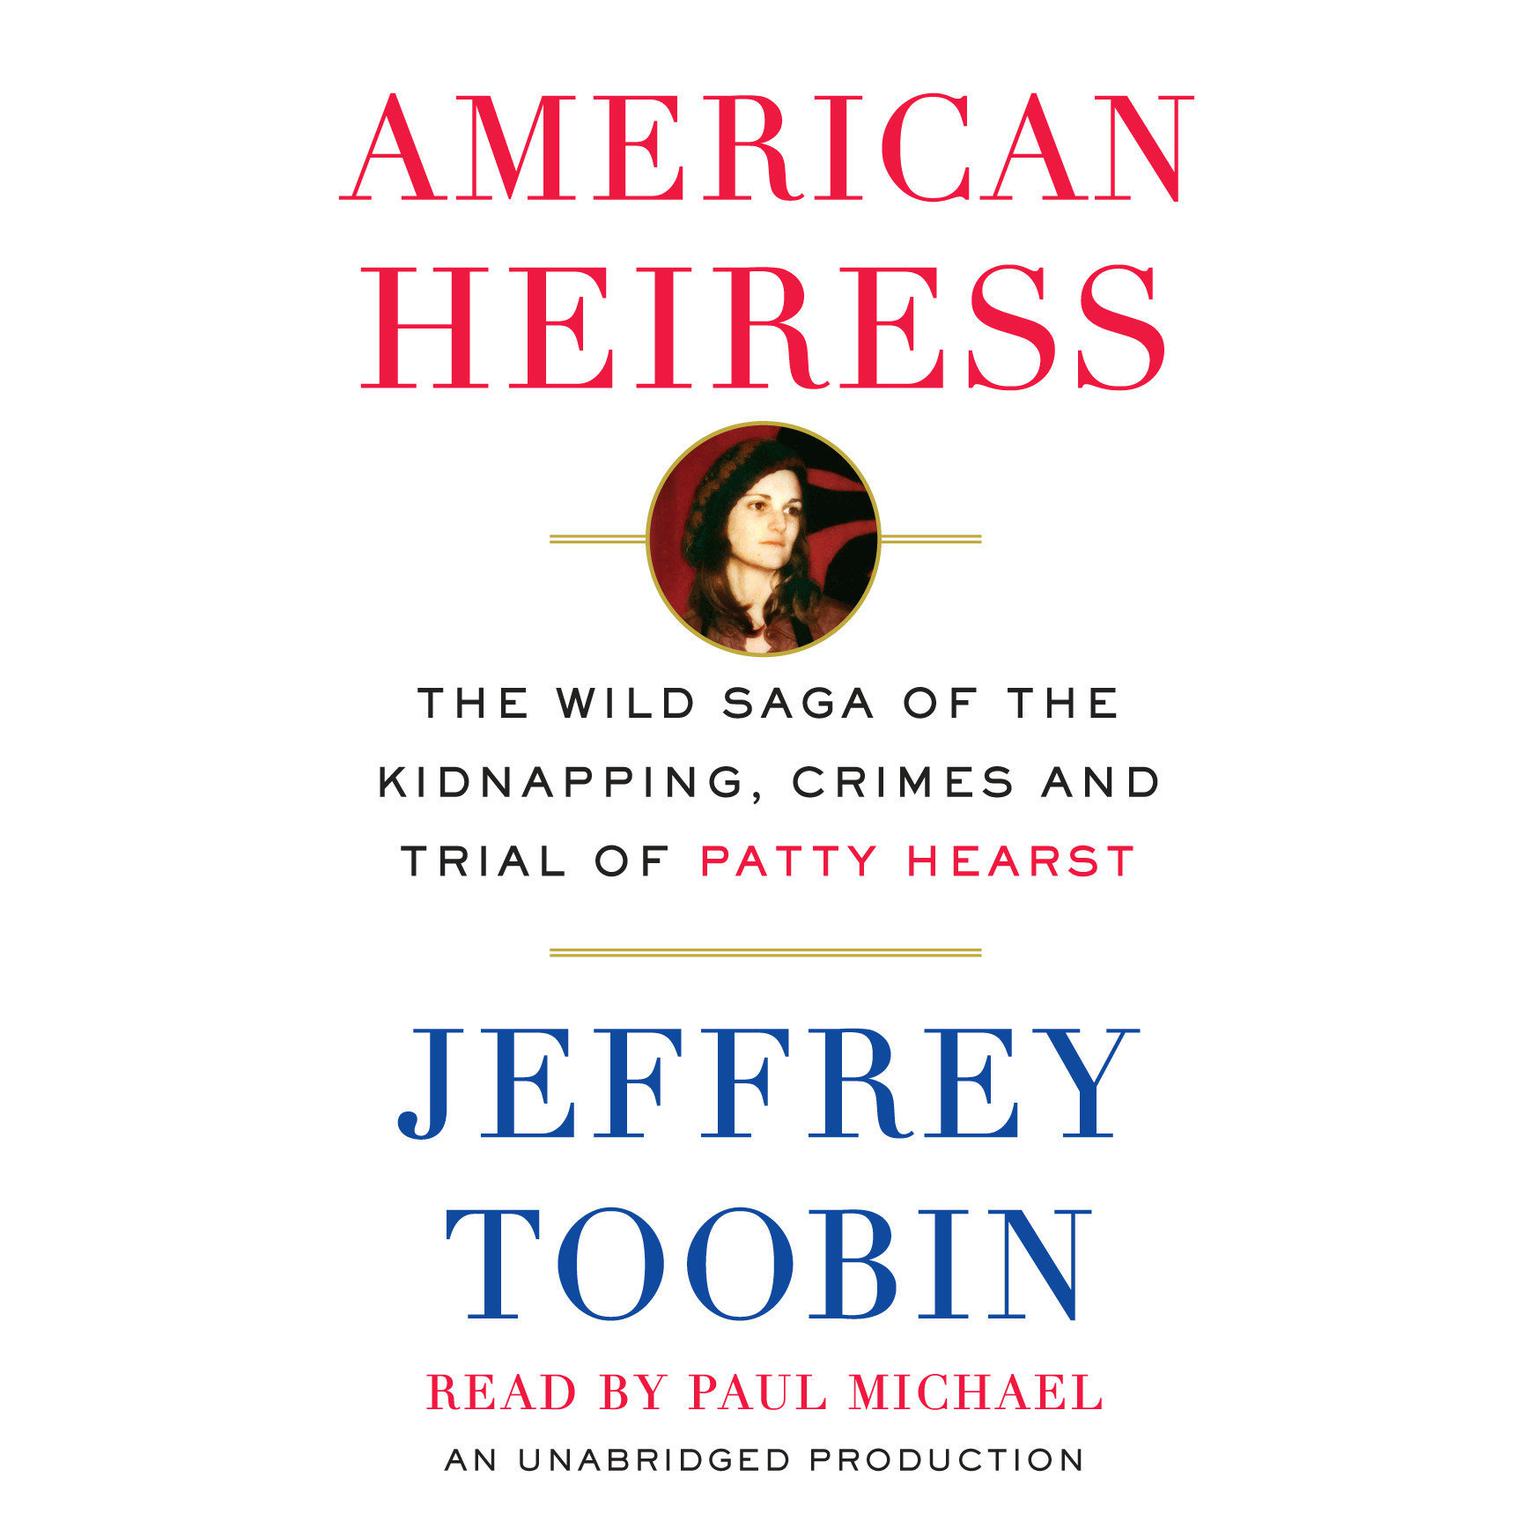 American Heiress: The Wild Saga of the Kidnapping, Crimes and Trial of Patty Hearst Audiobook, by Jeffrey Toobin